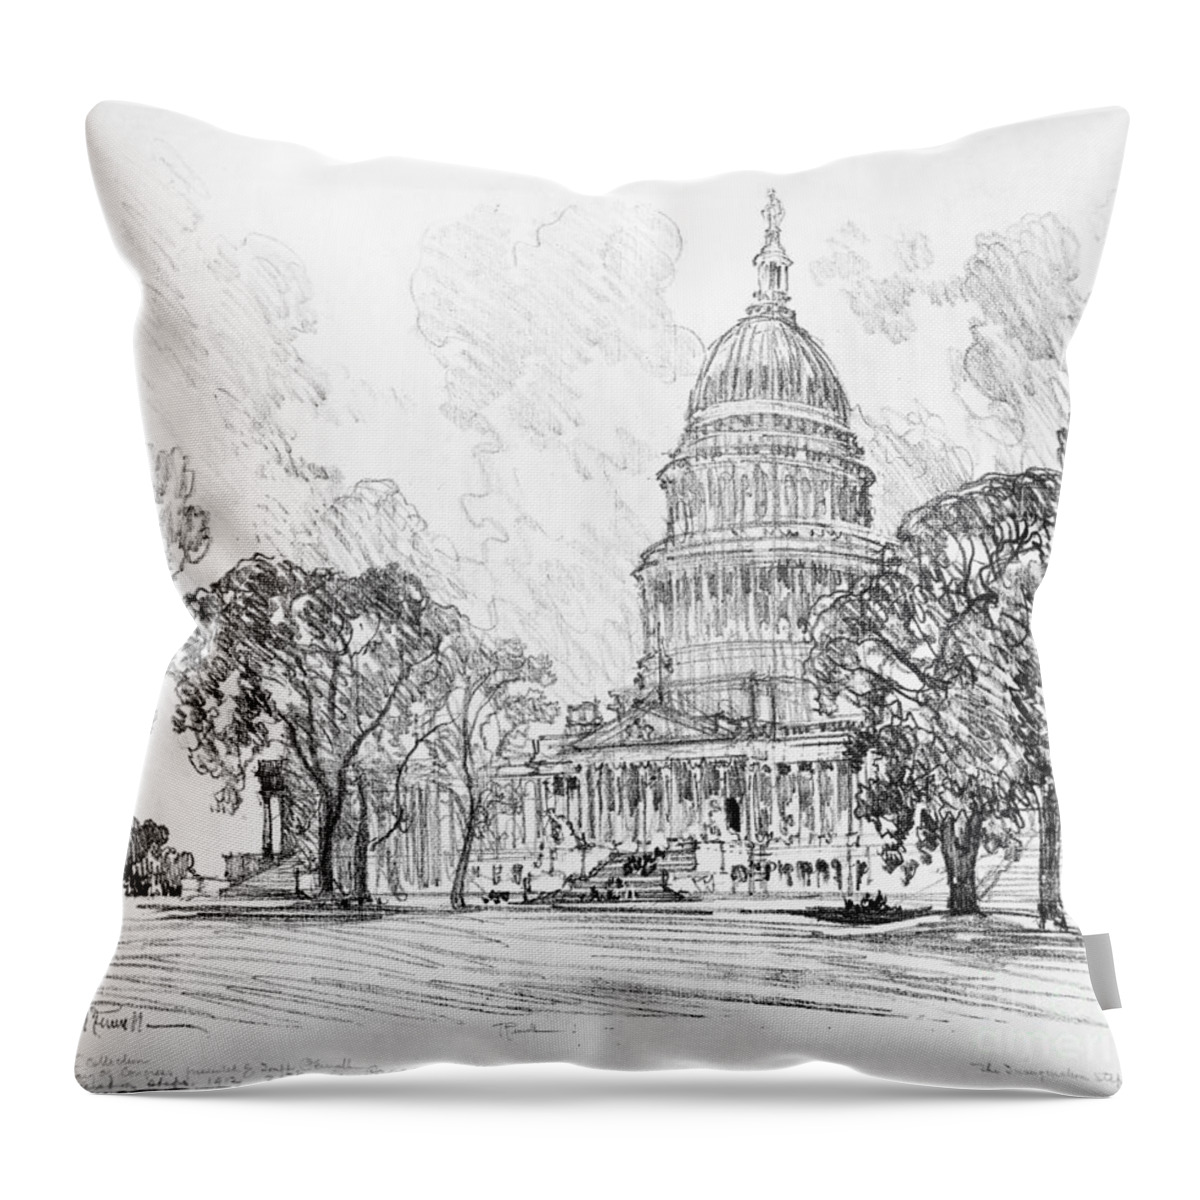 1912 Throw Pillow featuring the drawing Pennell Capitol, 1912 by Granger